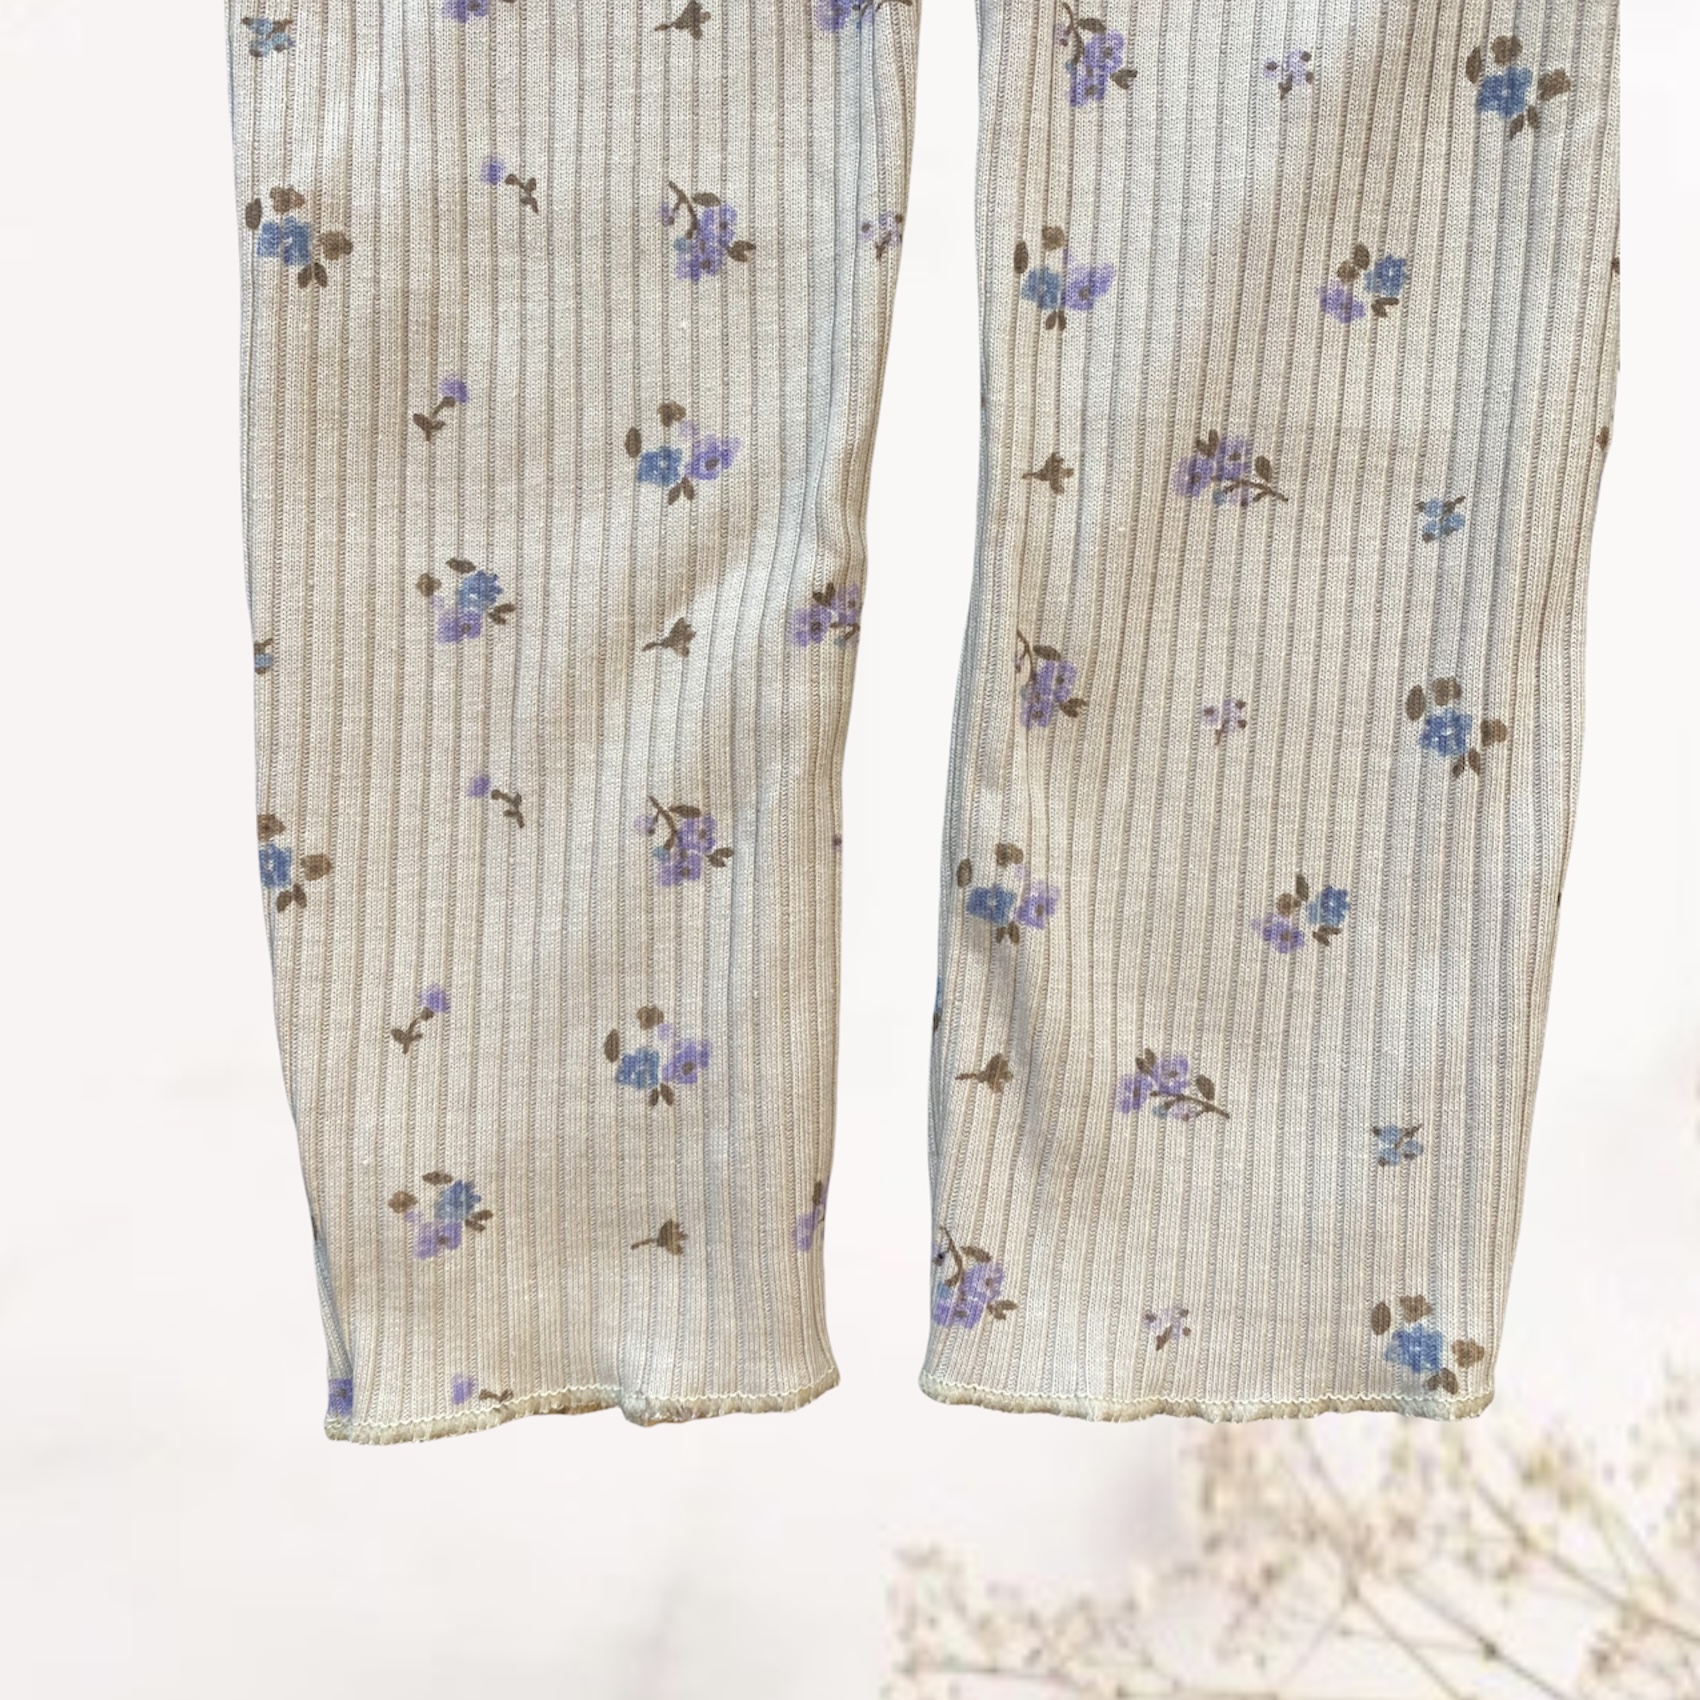 Pants with floral print